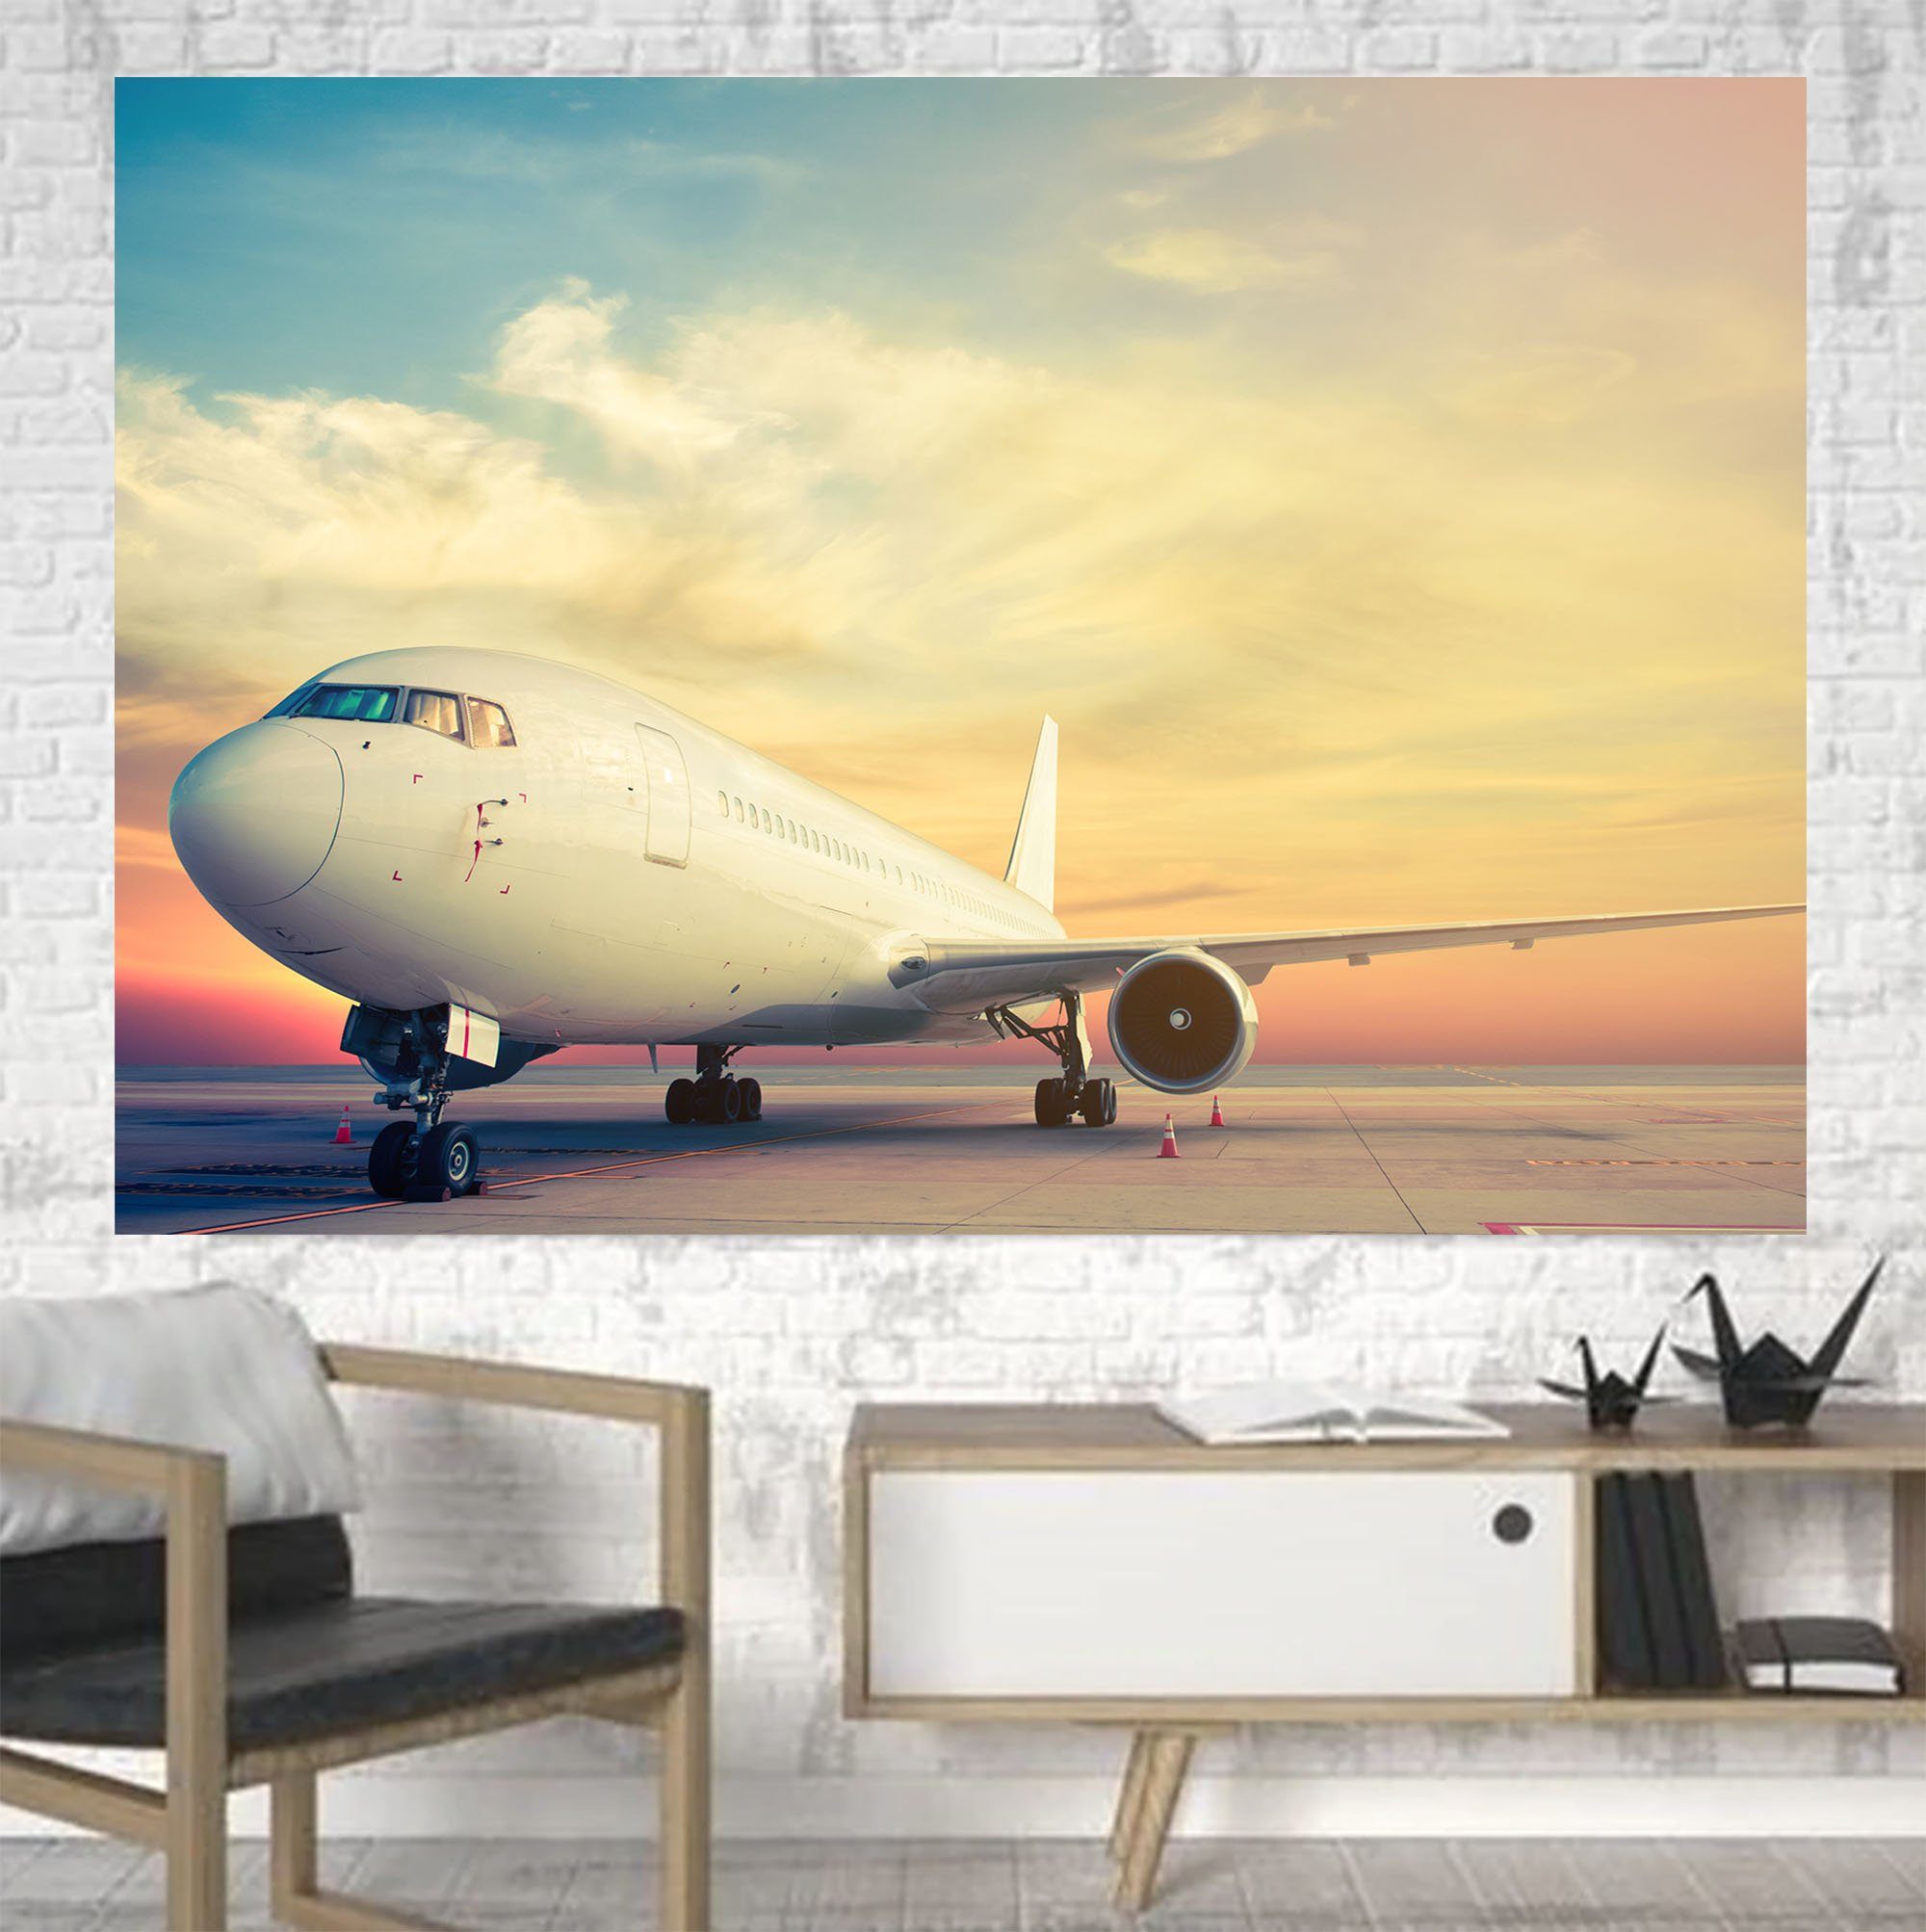 Parked Aircraft During Sunset Printed Canvas Posters (1 Piece)